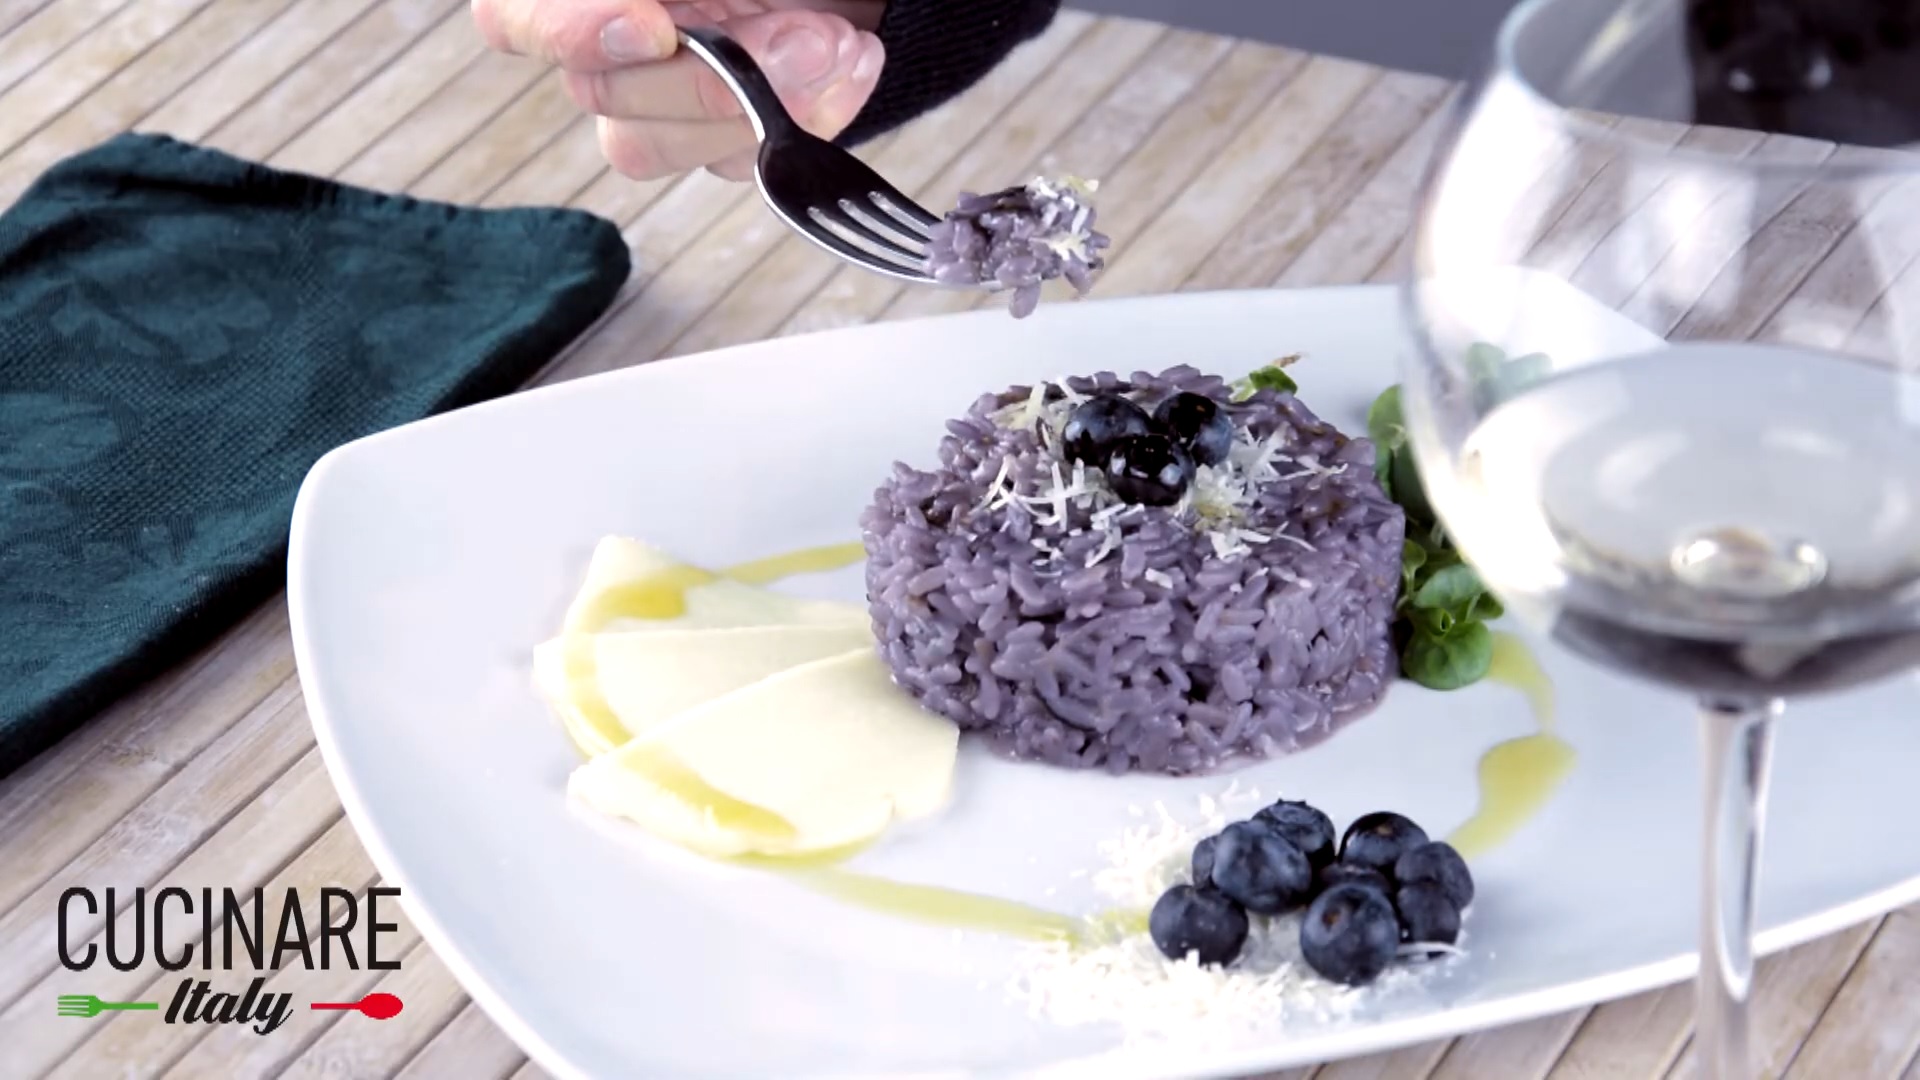 Risotto with Blueberries